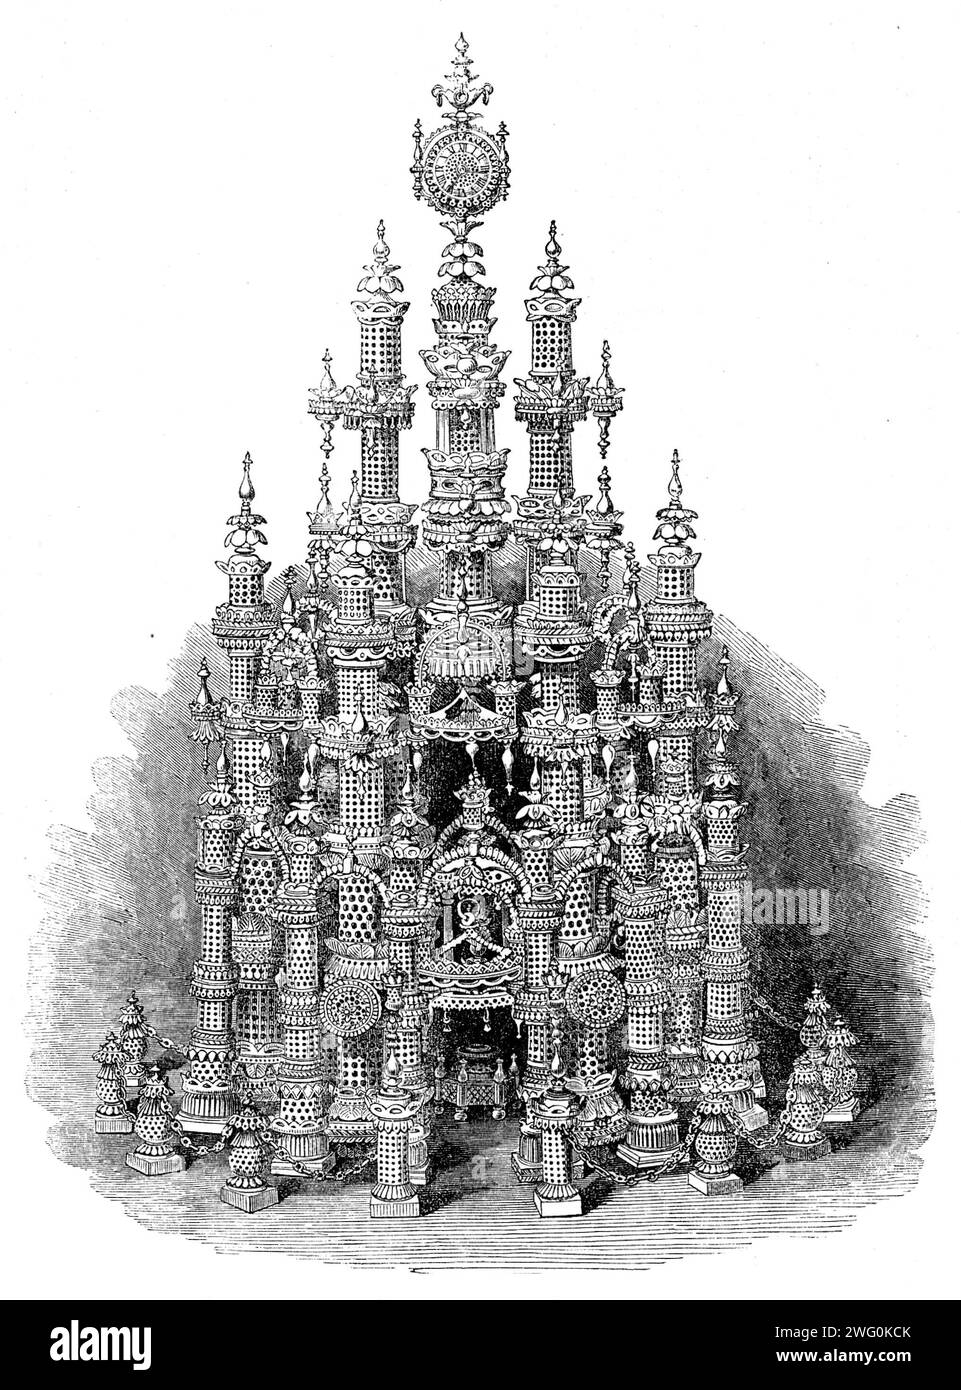 The International Exhibition: &quot;Temple of Art&quot;, in vegetable ivory, by B. Taylor, 1862. 'This work makes no pretentions to architectural beauty...its interest consists in its being formed of &quot;vegetable ivory&quot;...Vegetable ivory is the seed of a kind of palm, the Phytelaphas macrocarpa. Four seeds grow in each cell or cavity of a large fruit...It was Humboldt who first drew our attention to this seed, and pointed out its adaptability to useful purposes; and now we find it wrought into articles of beauty and utility...Mr. B. Taylor...exhibits his temple and numerous little arti Stock Photo